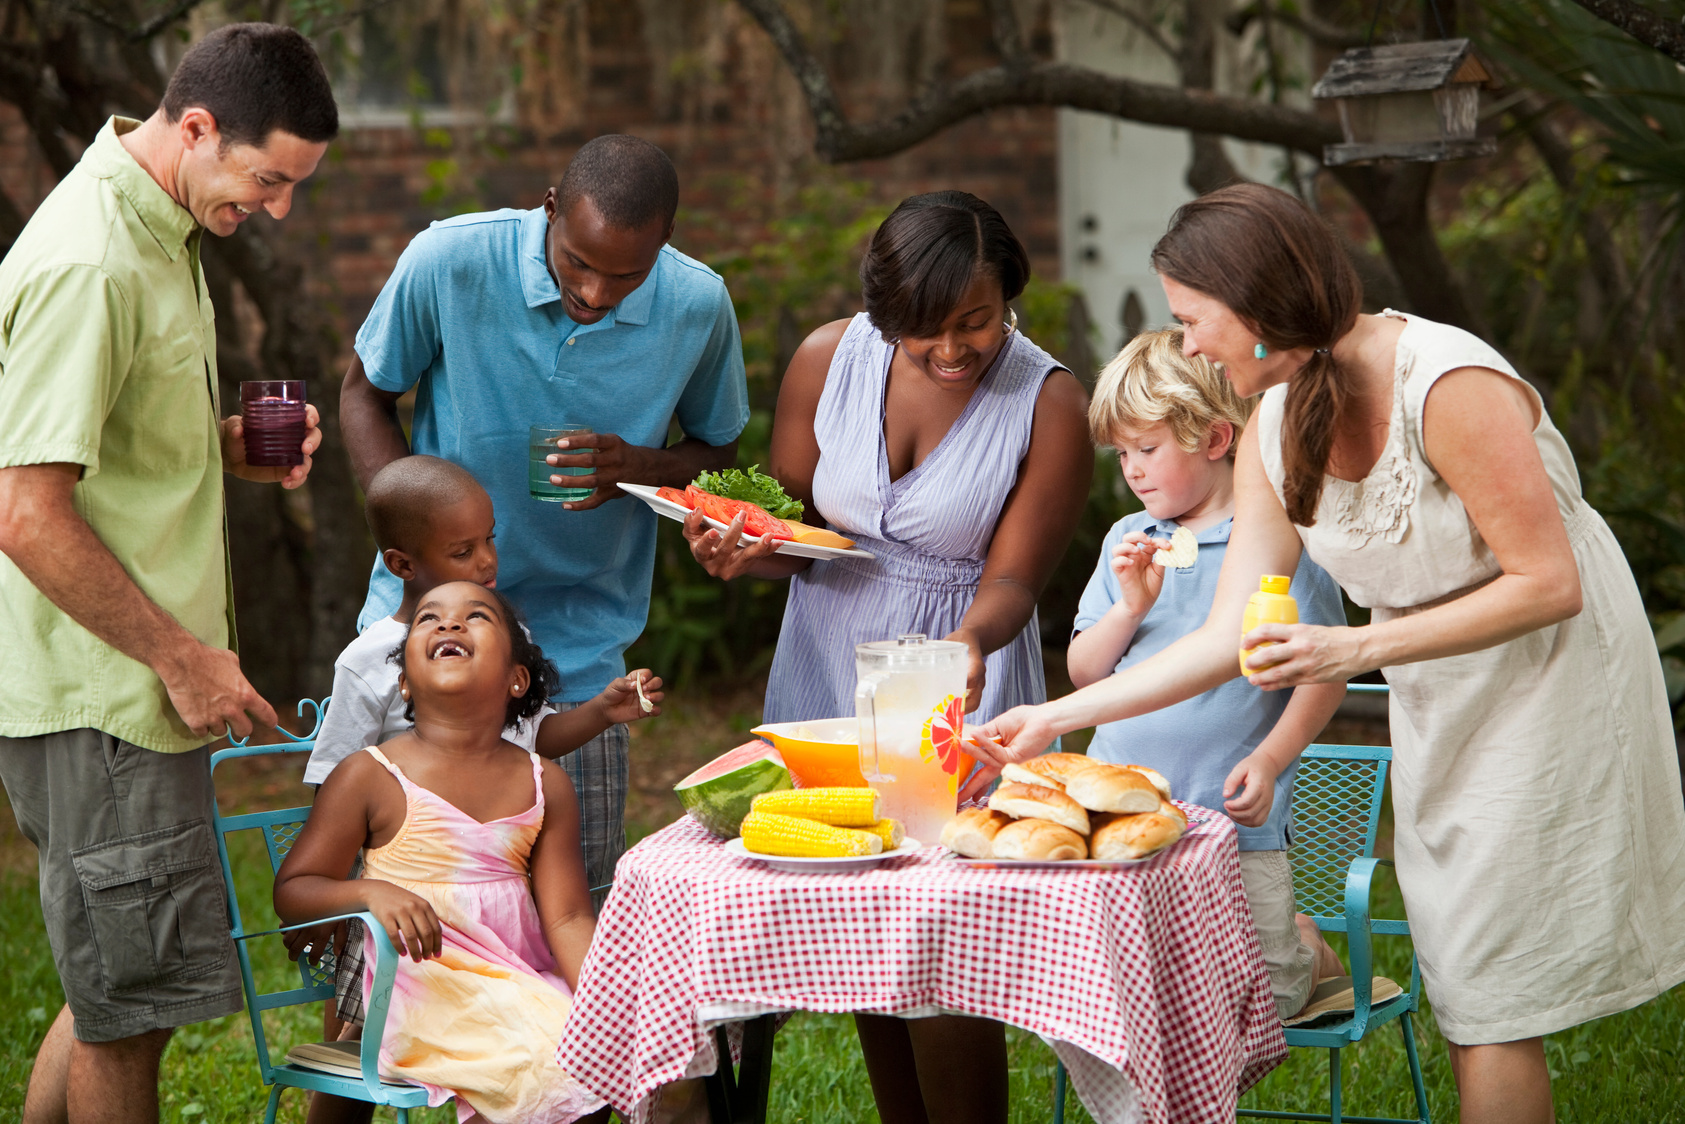 Two families at backyard cookout